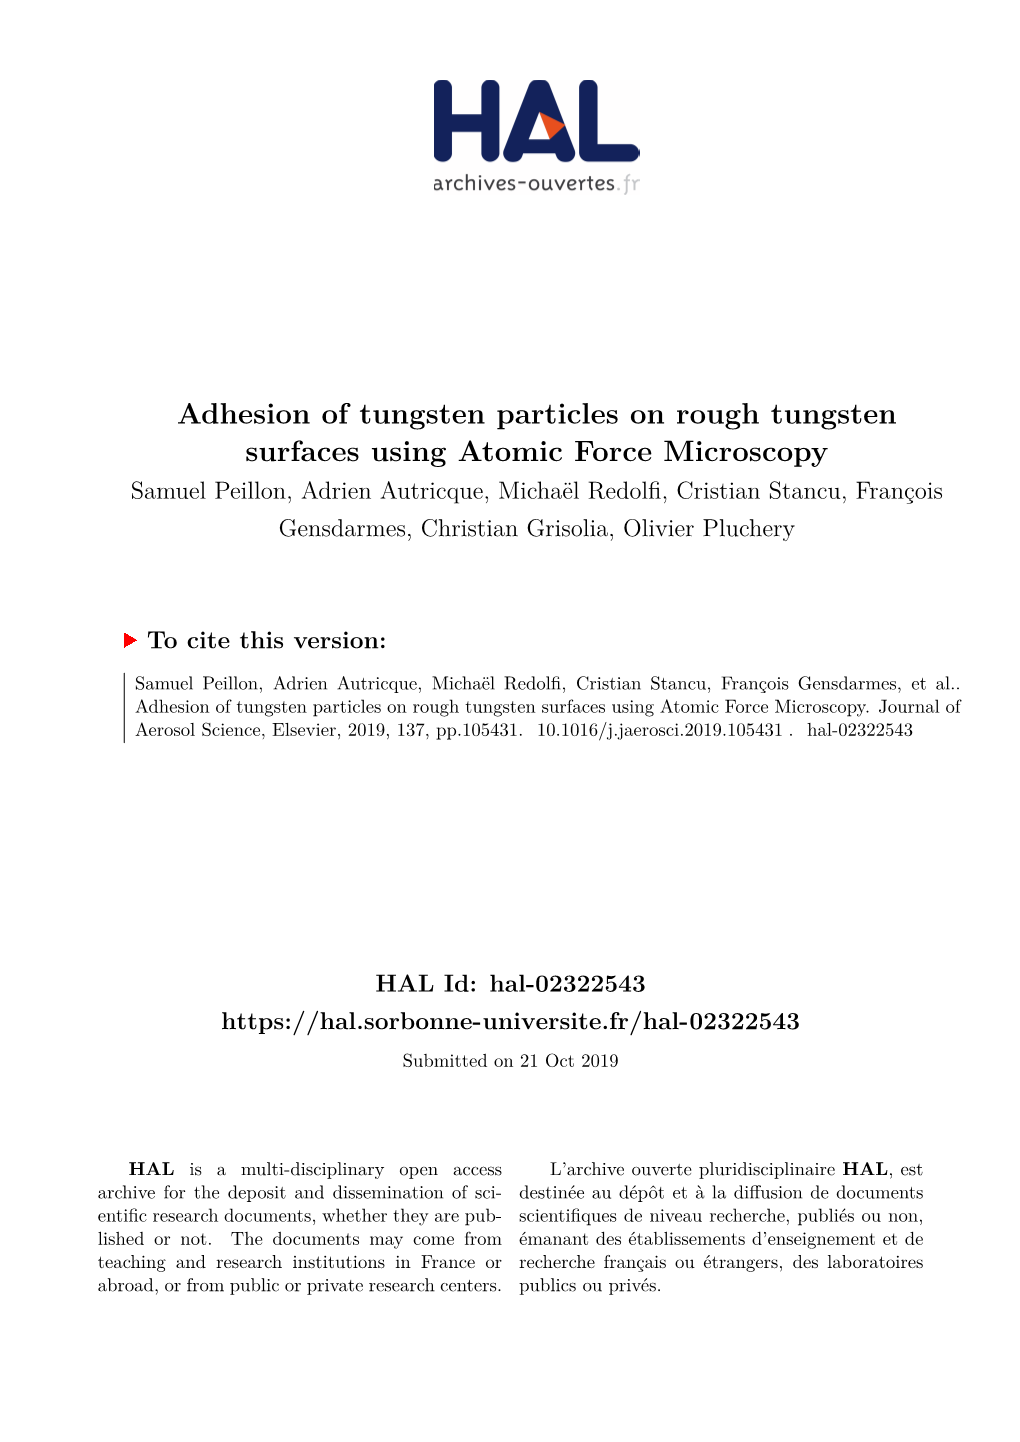 Adhesion of Tungsten Particles on Rough Tungsten Surfaces Using